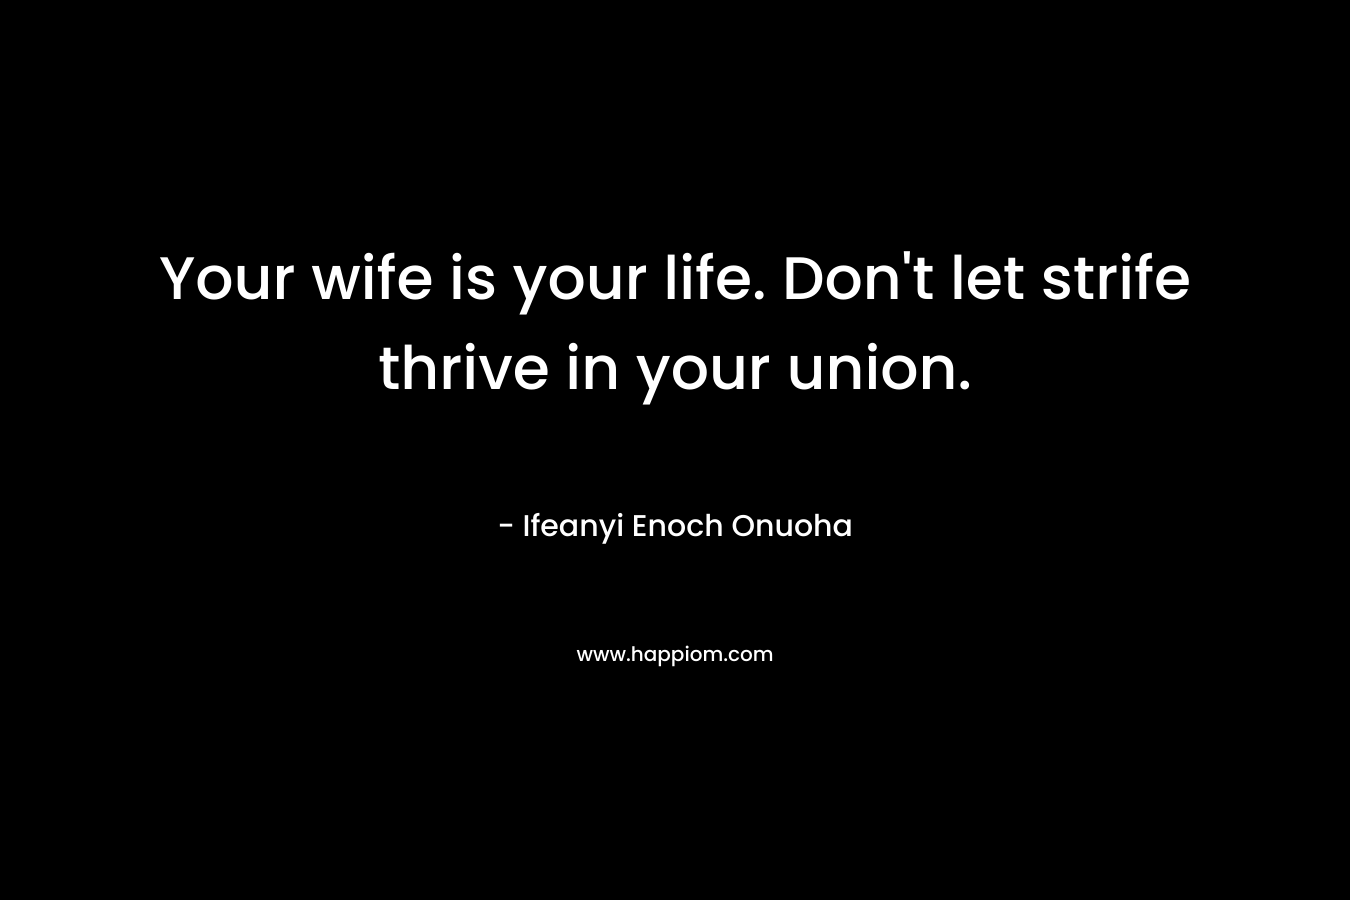 Your wife is your life. Don’t let strife thrive in your union. – Ifeanyi Enoch Onuoha